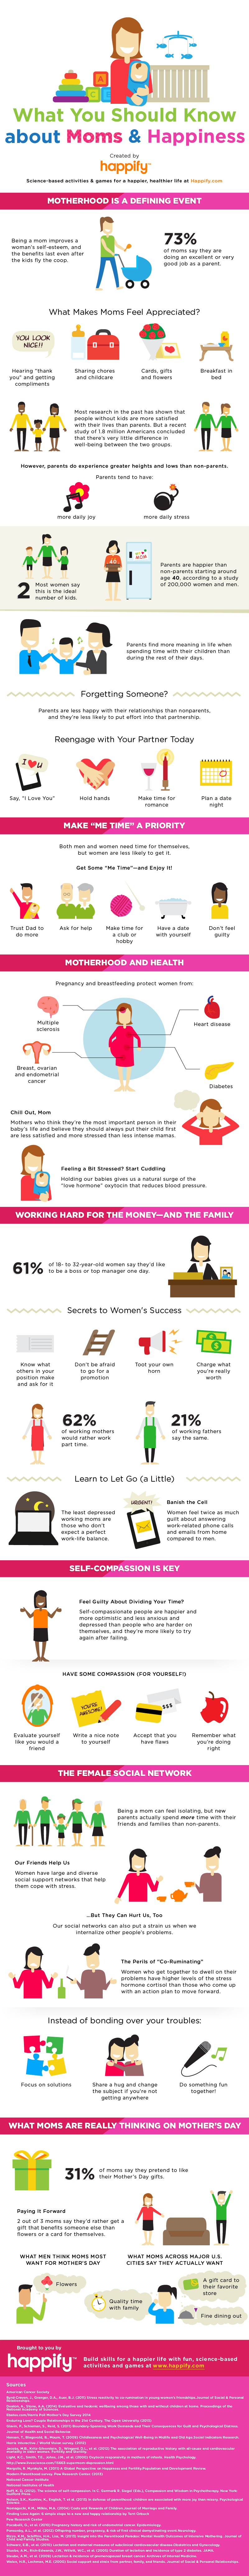 Thumbnail for Moms & Happiness - An Infographic